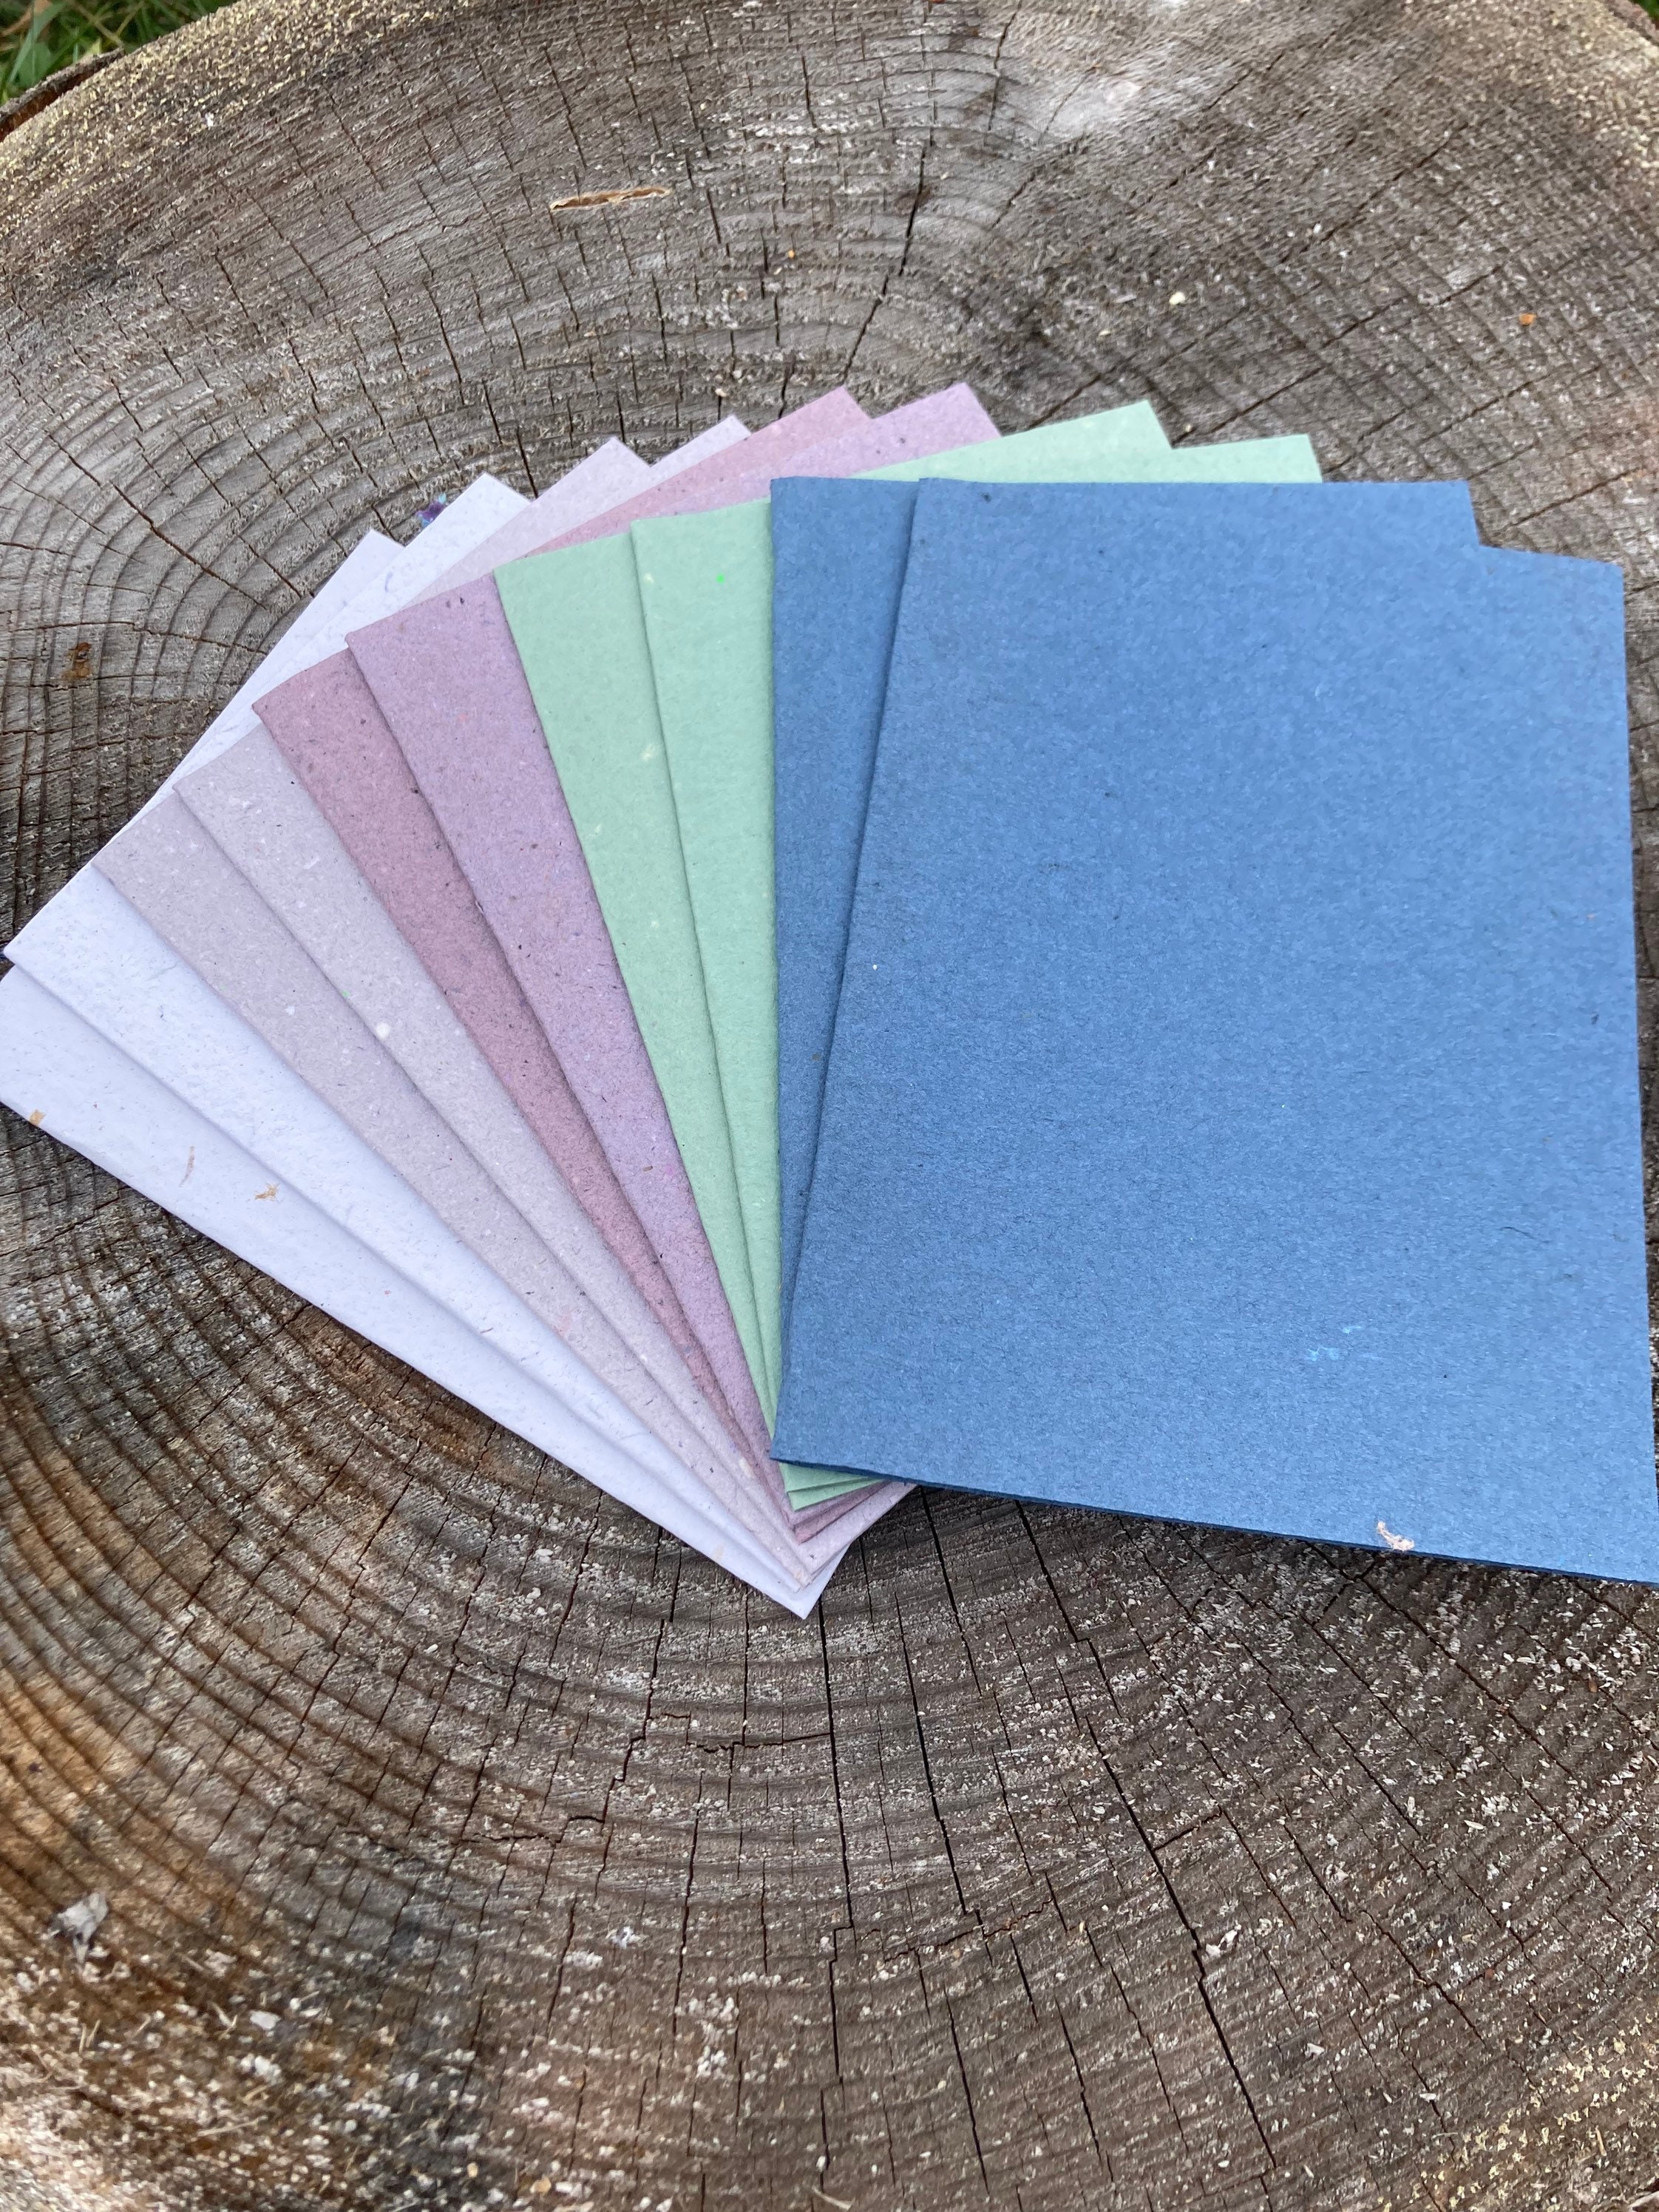 Handmade Paper, Recycled Paper, Letter Size, Handmade Paper, Recycled Paper,  Eco Friendly Paper, American Quarto, Homemade Paper, Mixed 